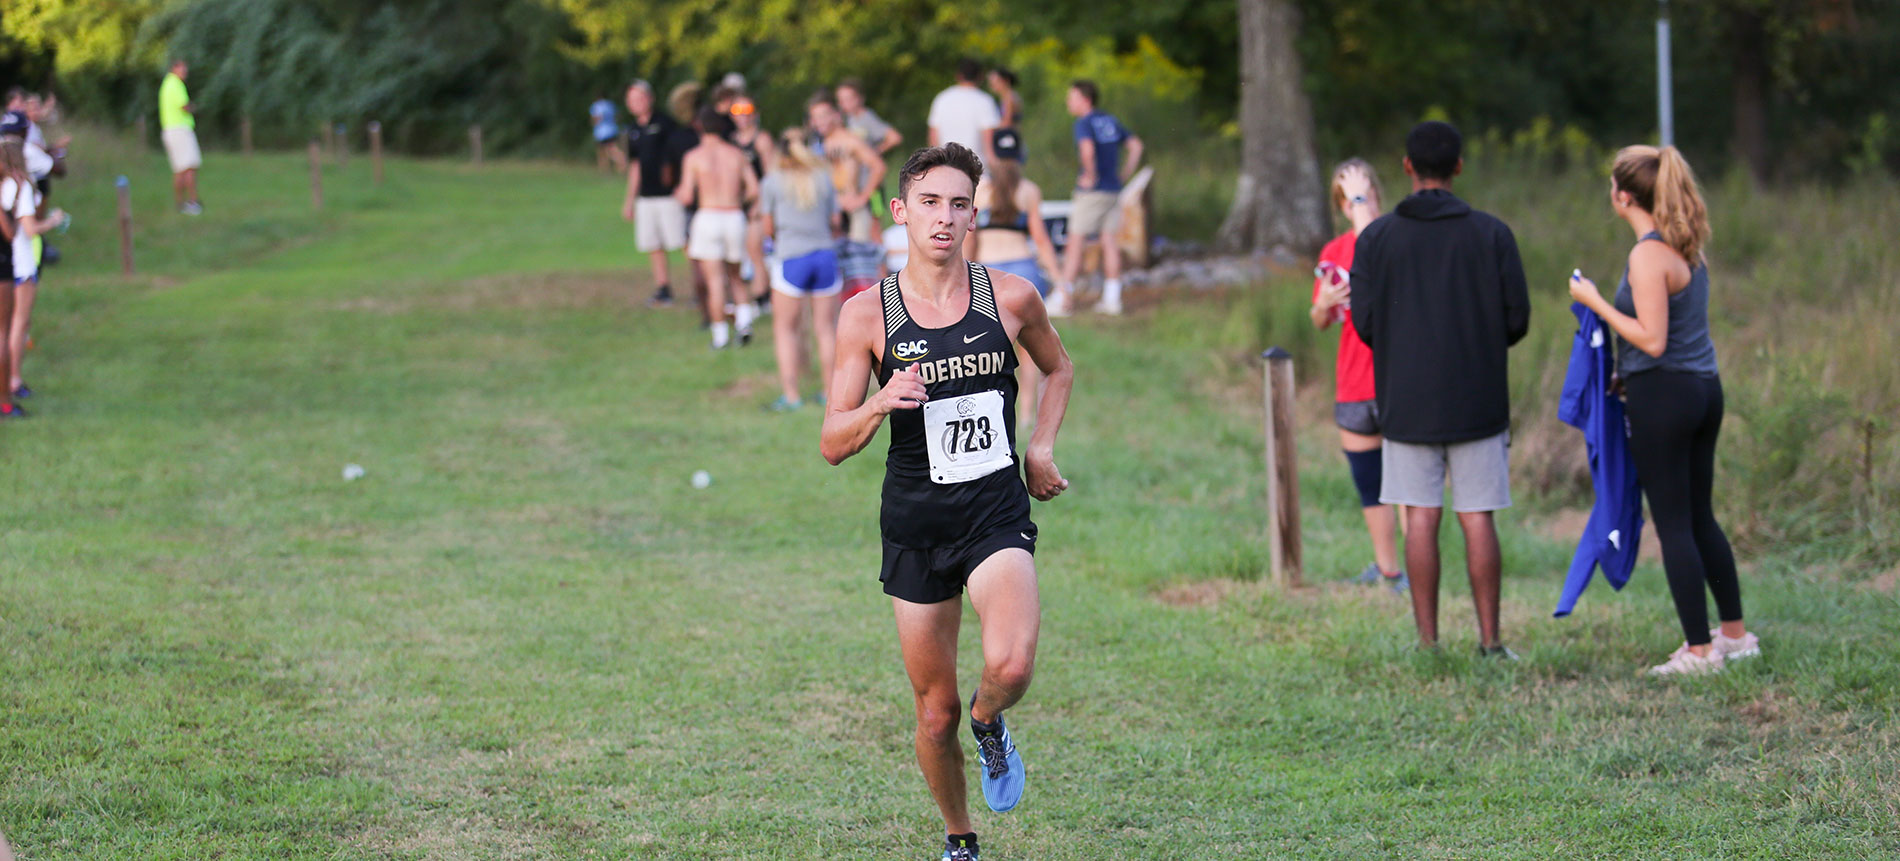 Men’s Cross Country Finishes Tied for 11th at the Rock Pre-National Meet